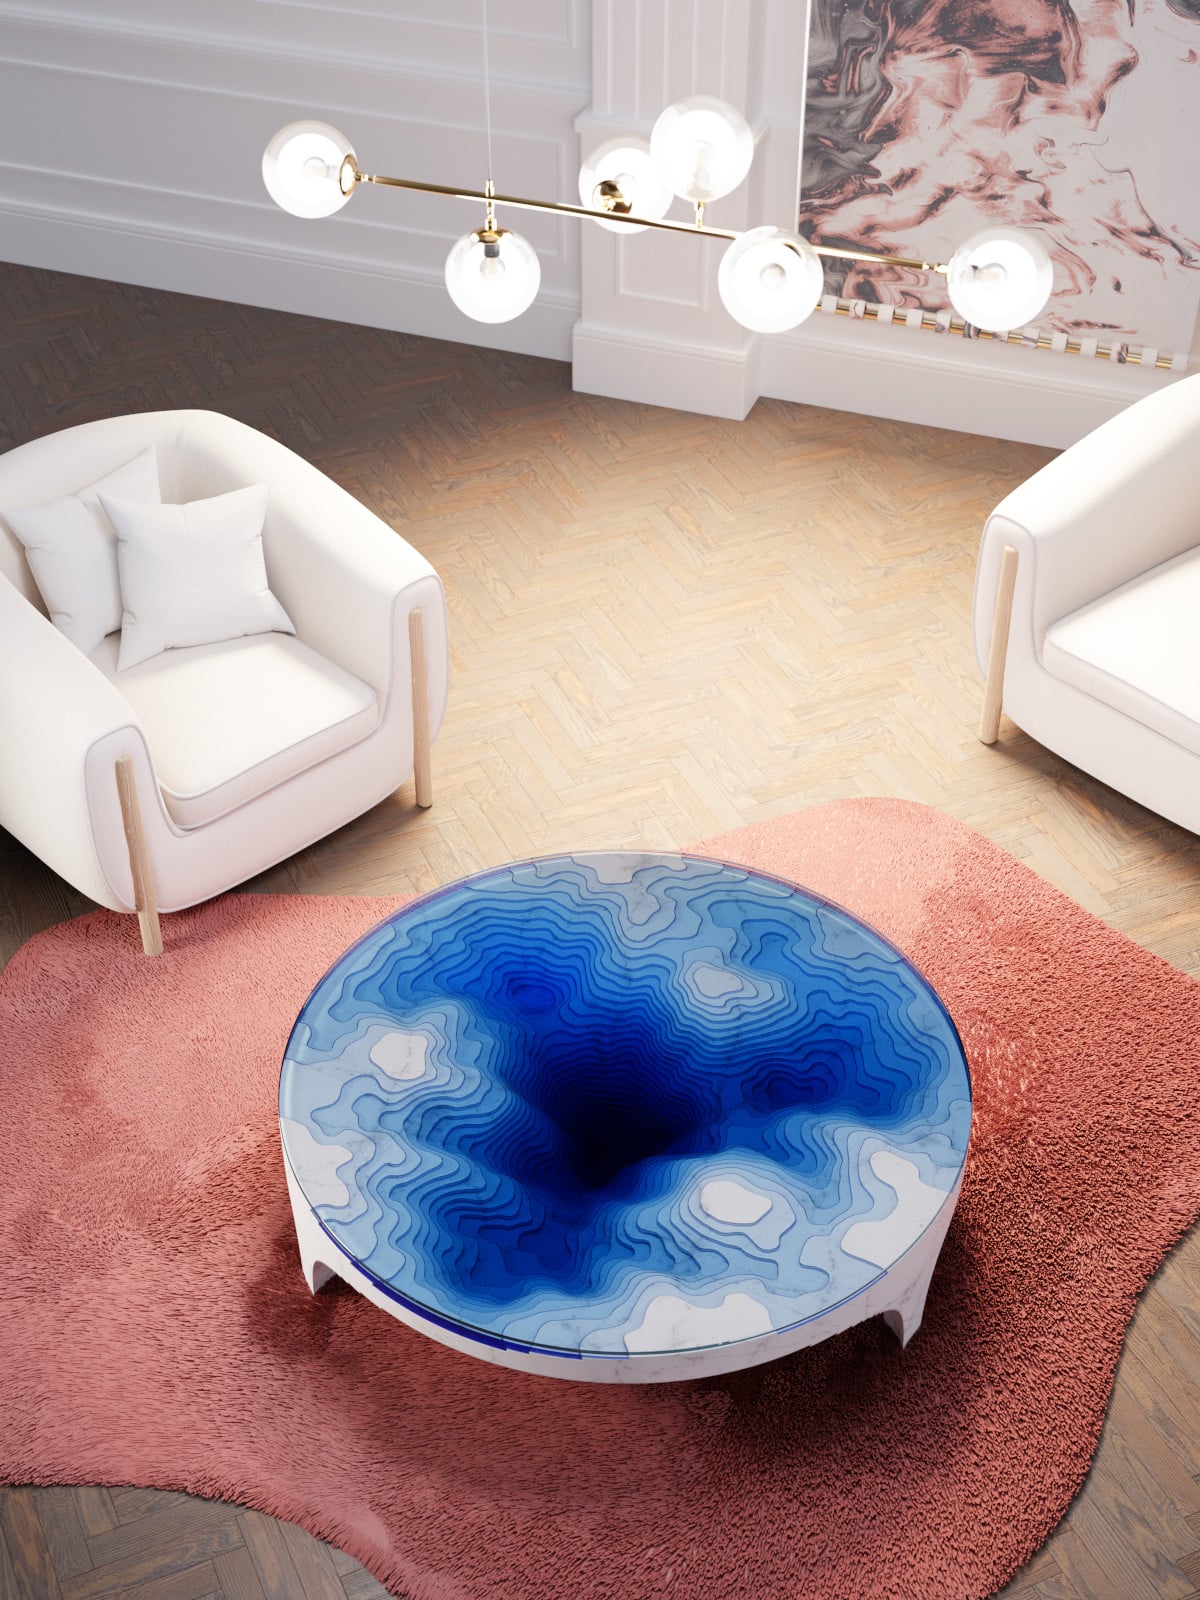 Duffy London’s Abyss Horizon Table is Back and More Stylish Than Ever